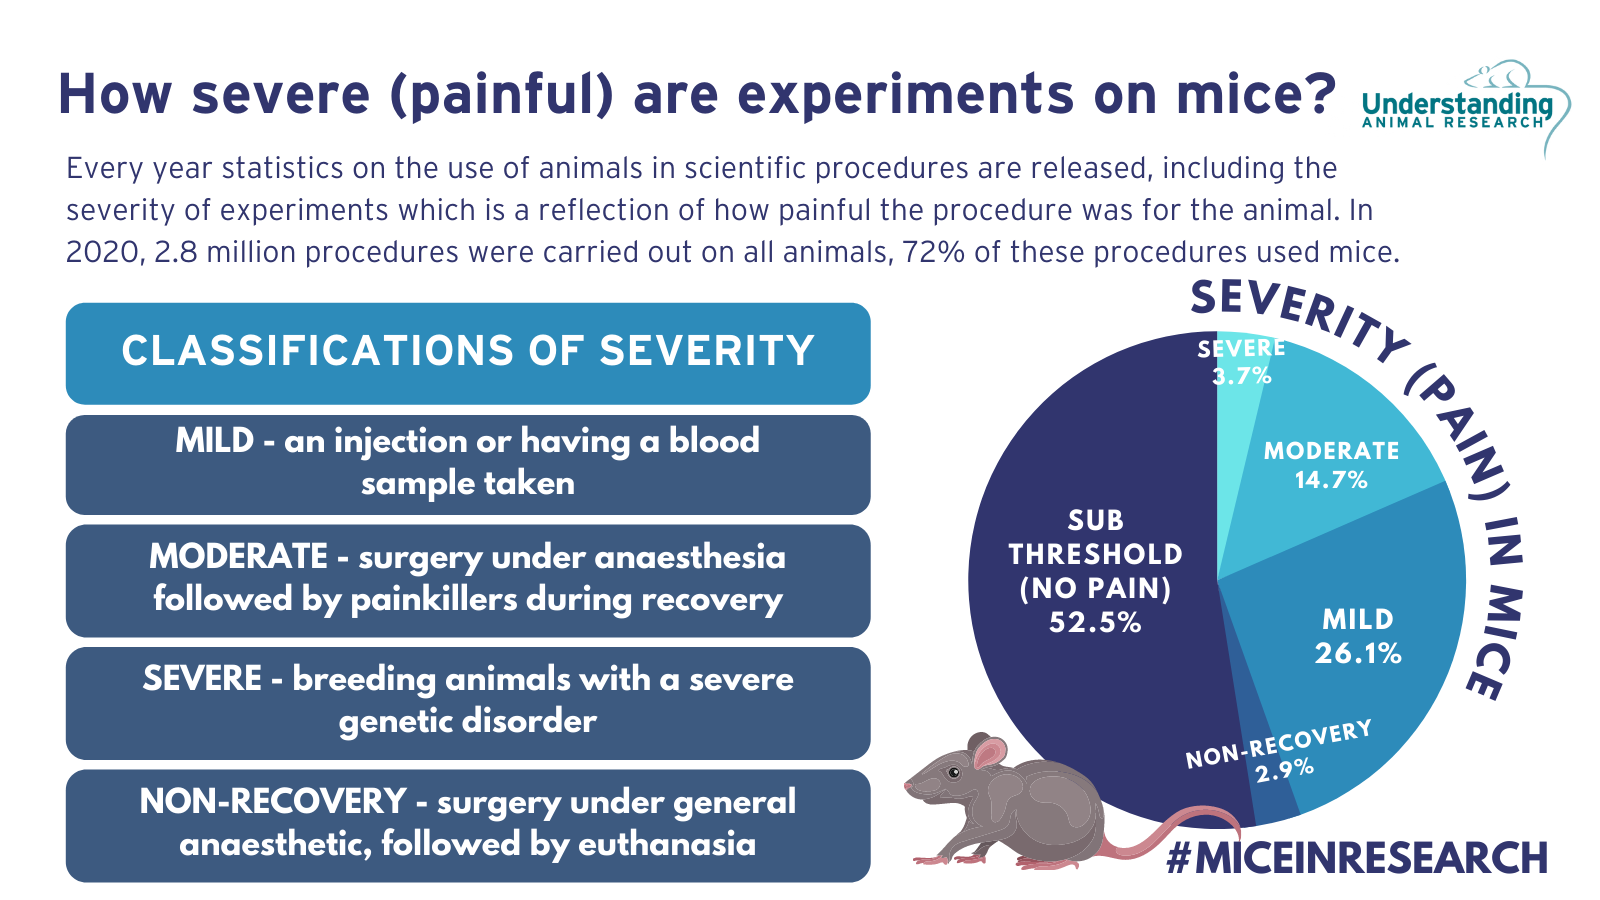 Mice in research statistics for Great Britain, 2020 (severity classification)